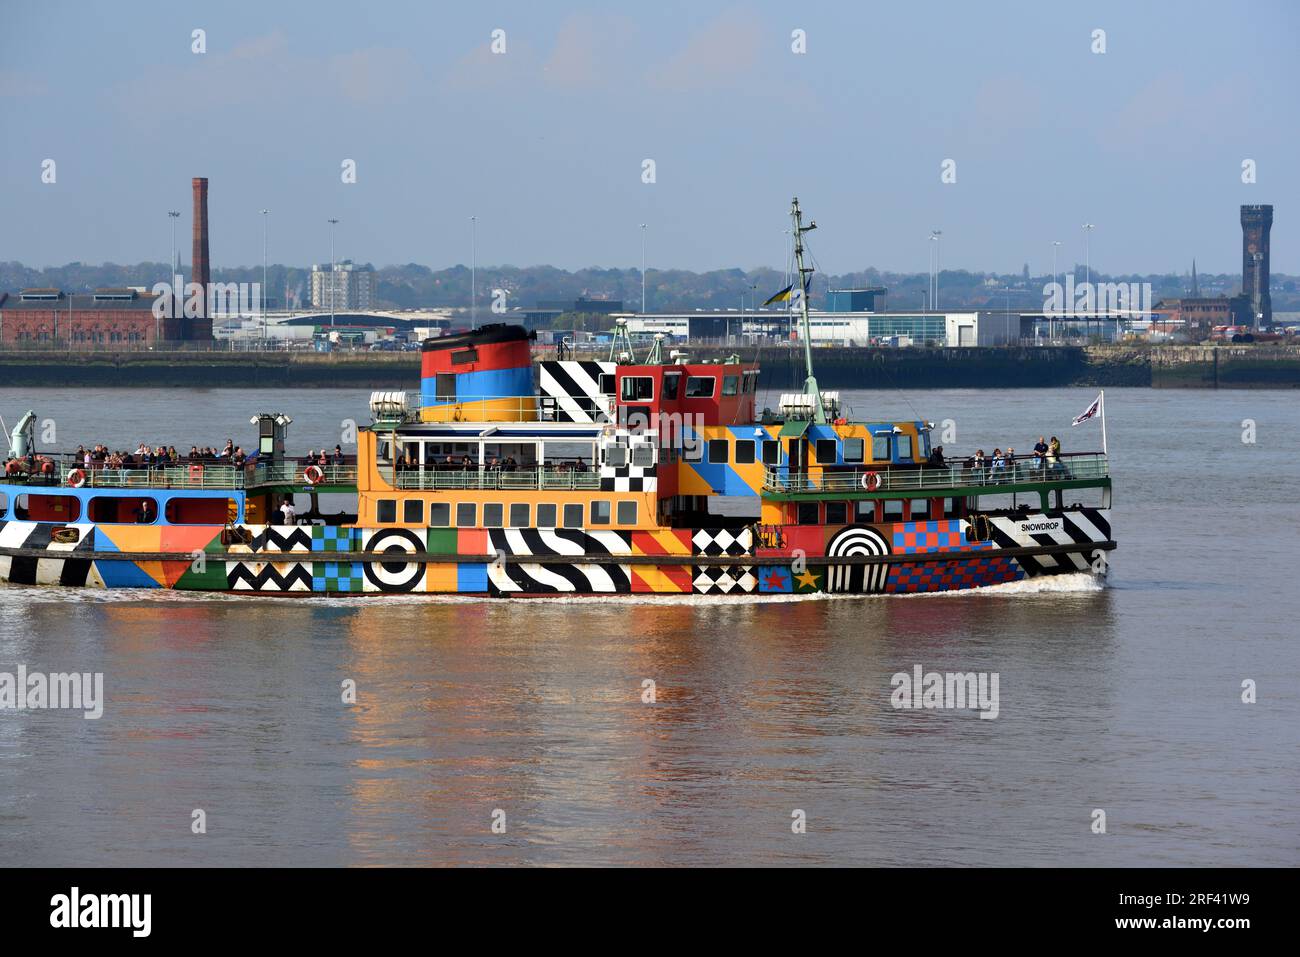 Colourful or Multicoloured Mersey Ferry or Ferryboat Across the Mersey River between Liverpool and Birkenhead Stock Photo